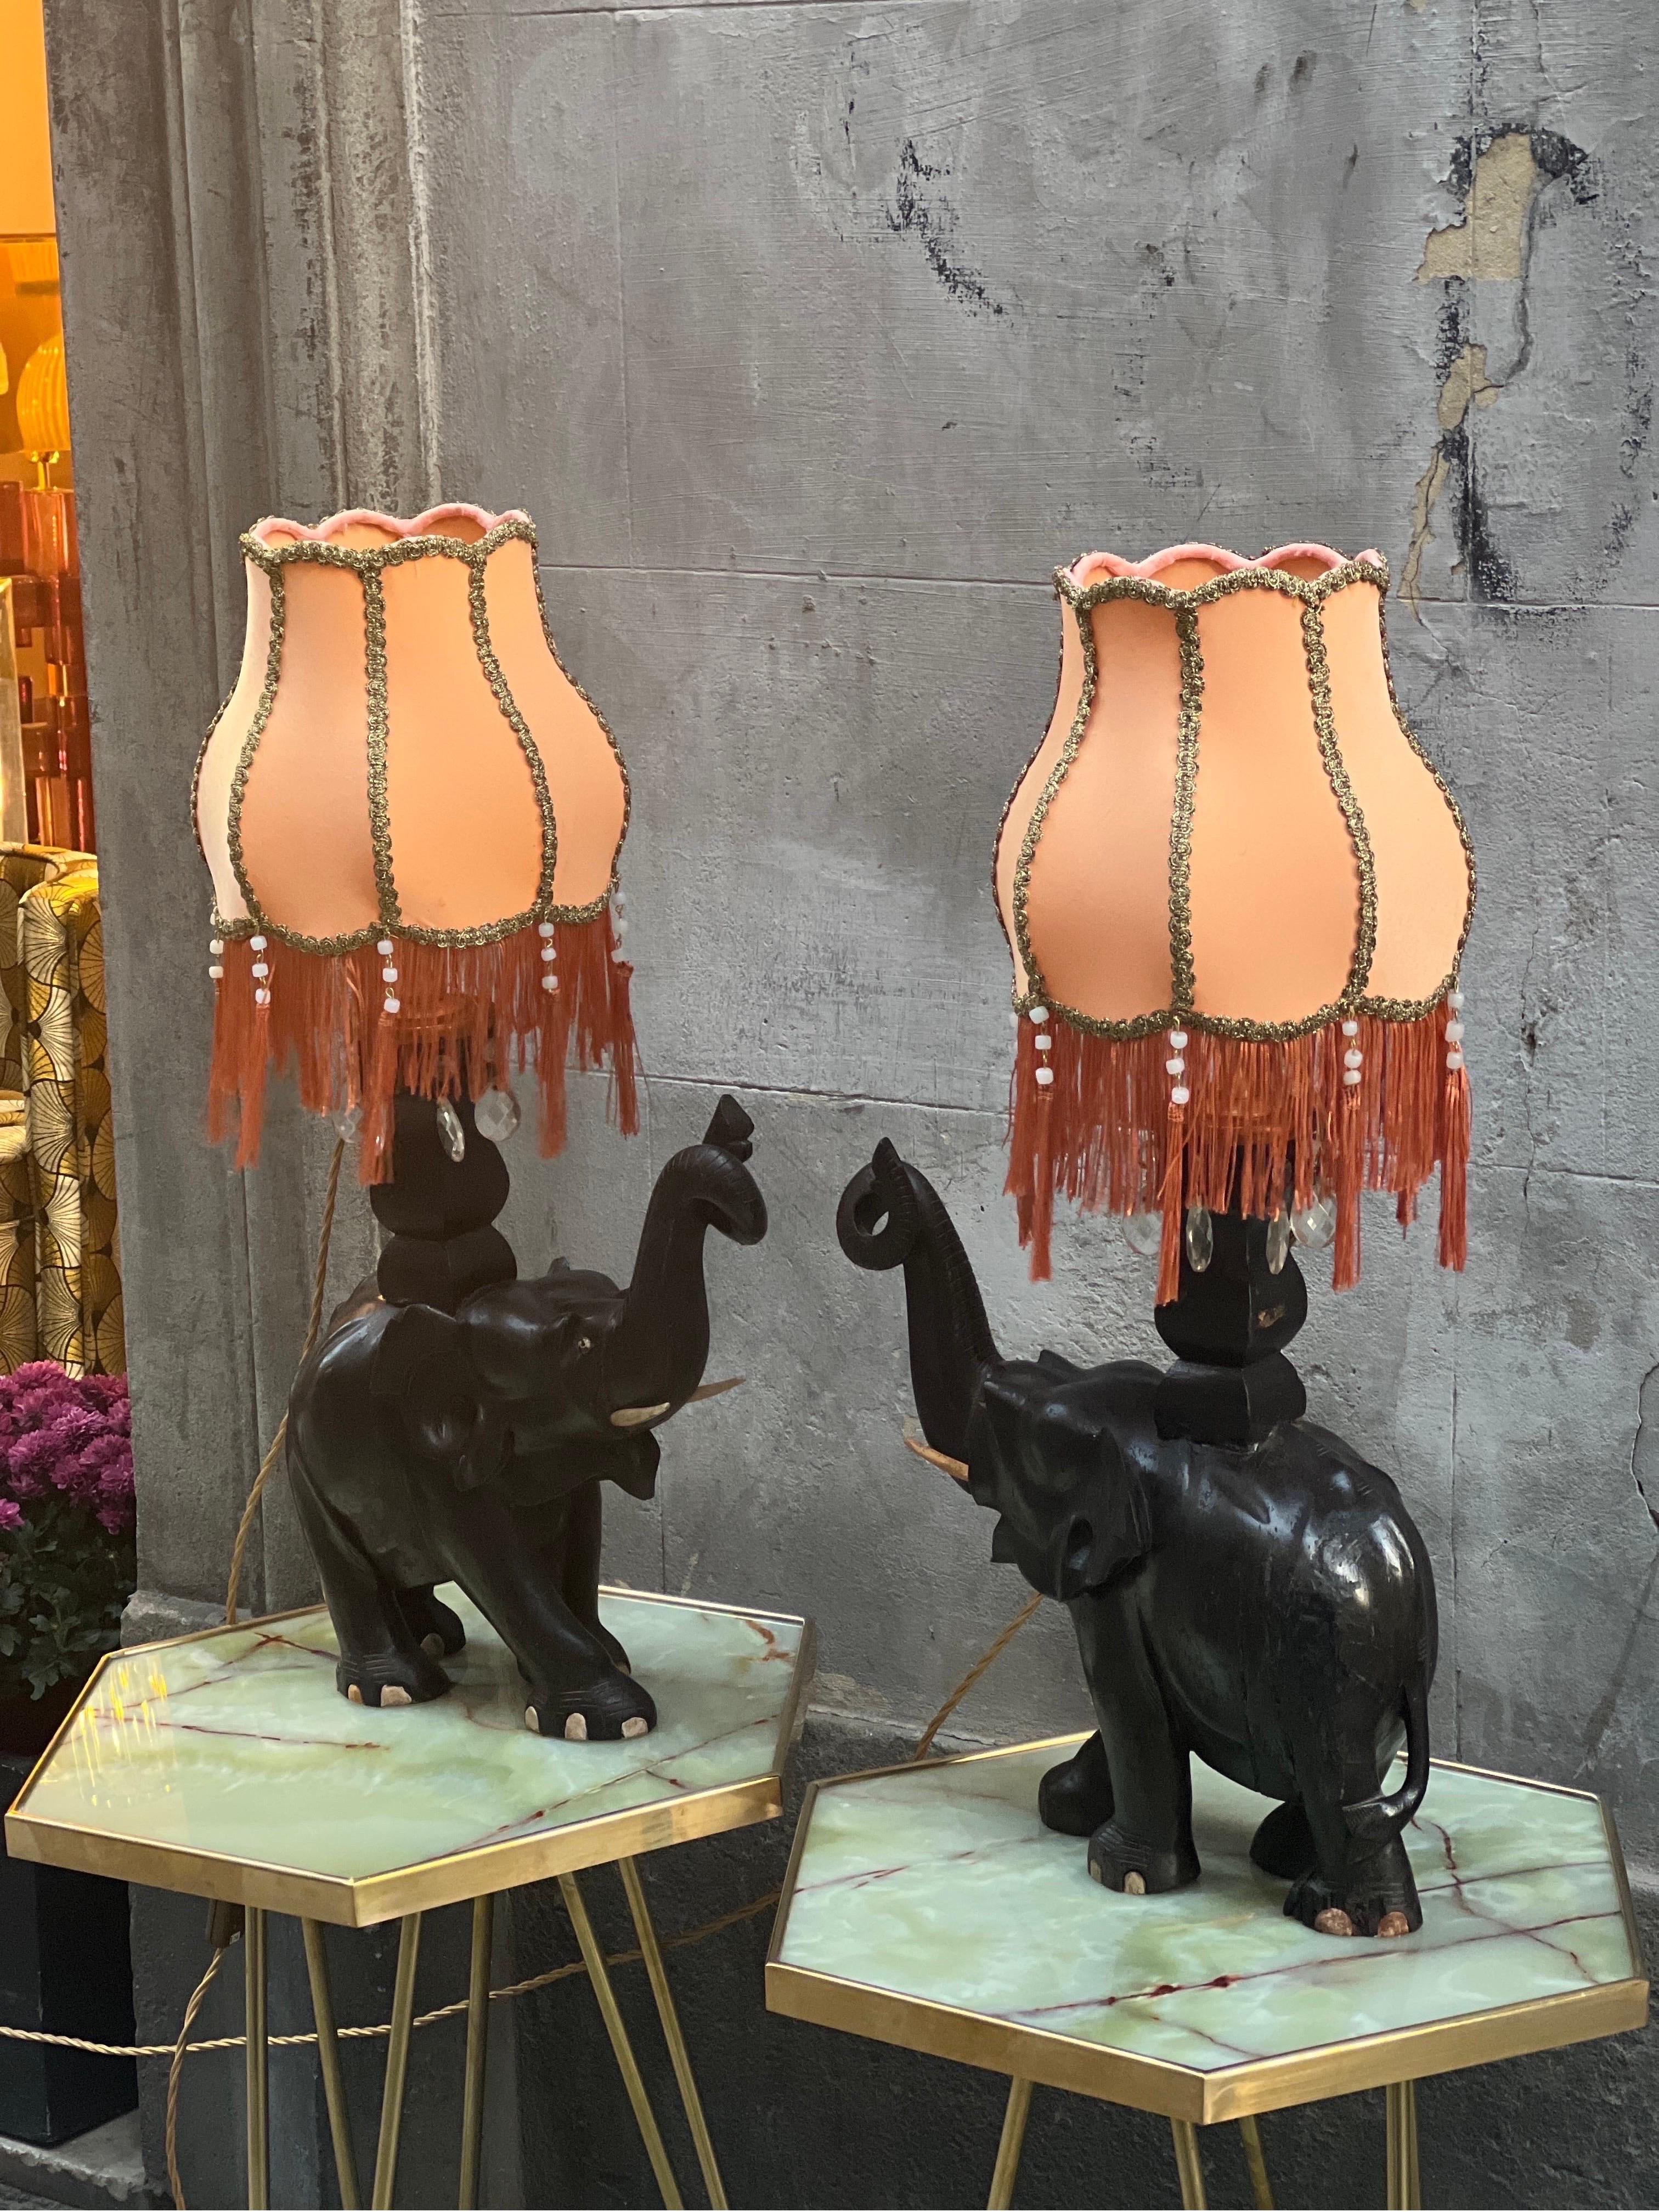 20th Century Pair of Ebony Elephants Table Lamps with Orange Lampshades and Fringes, 1920s